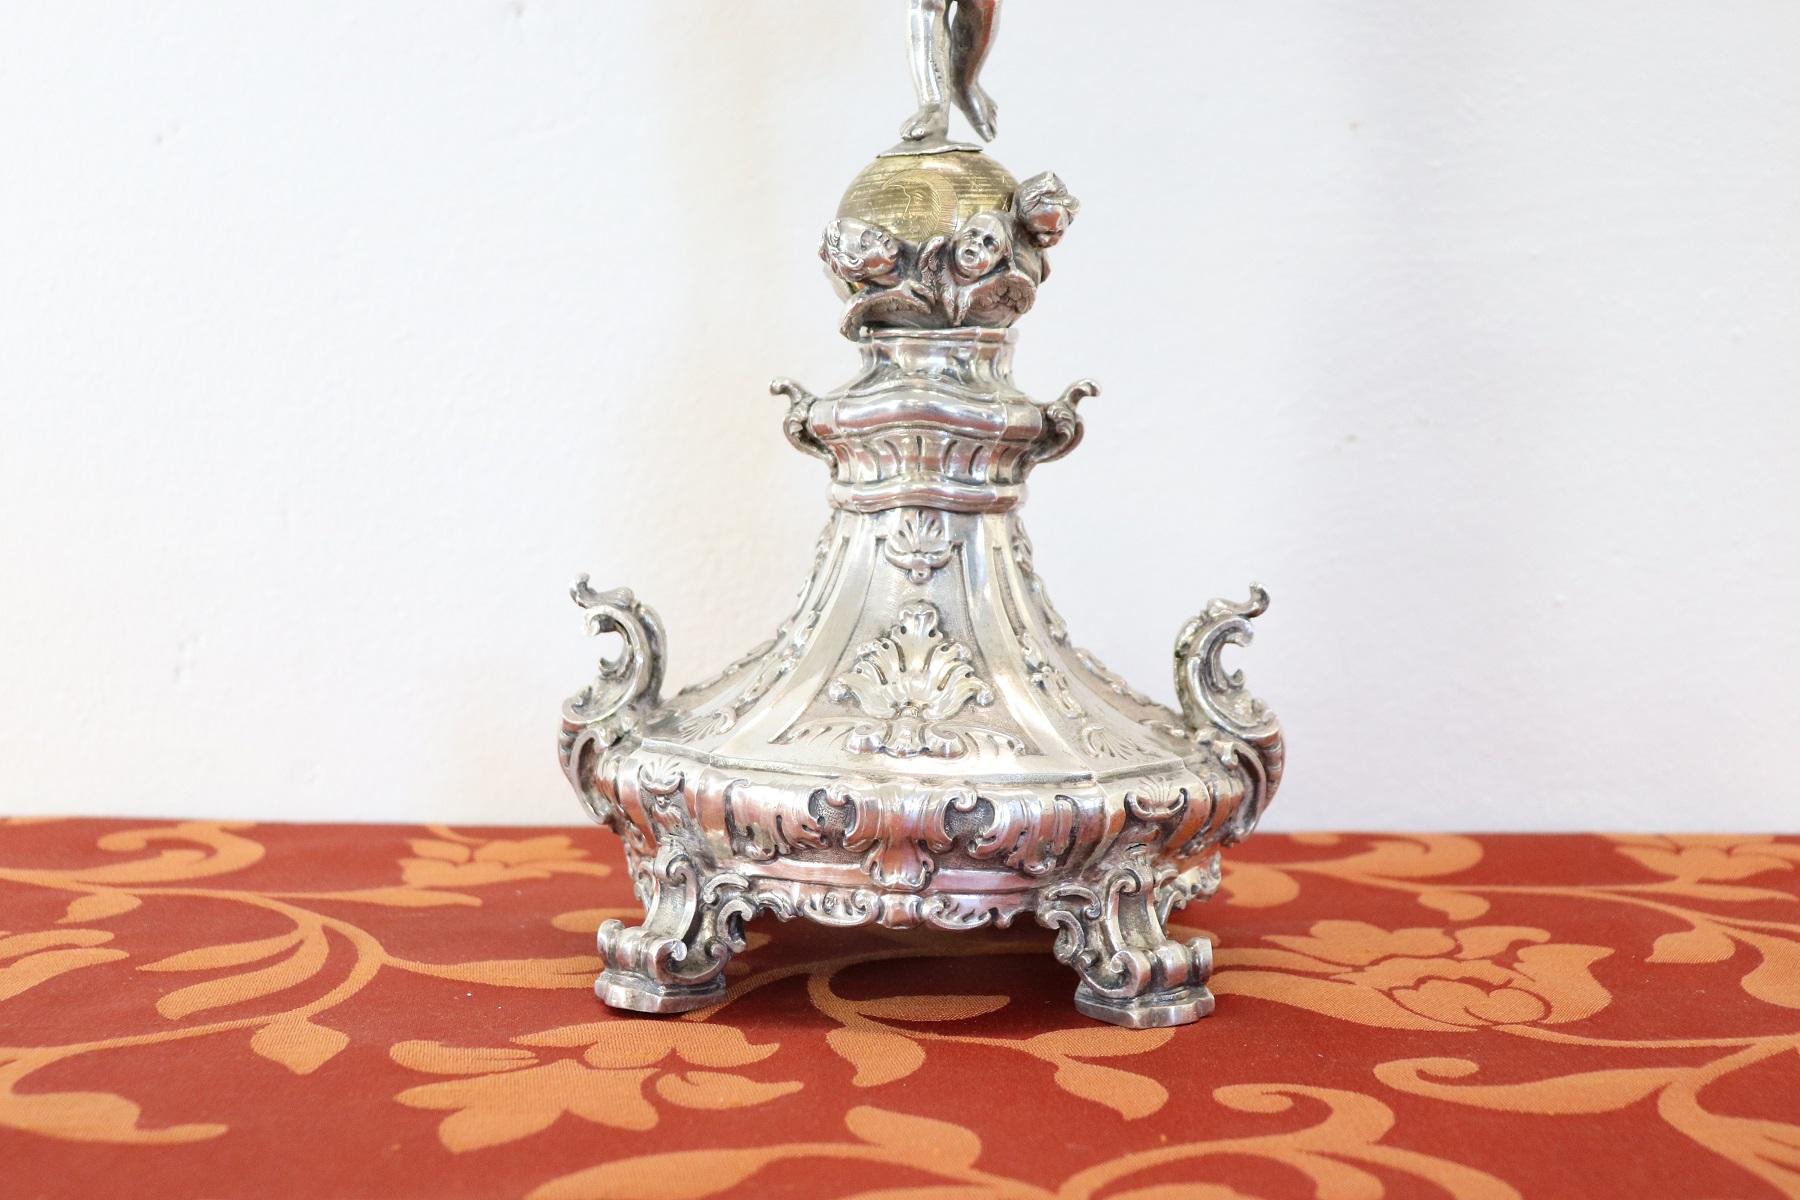 Important Sicilian monstrance in embossed and chiselled silver.
characterized by a candlestick base with four curled feet, from which, on a starry globe, resting on a foot, a winged putto supporting the door - relics surrounded by a radial